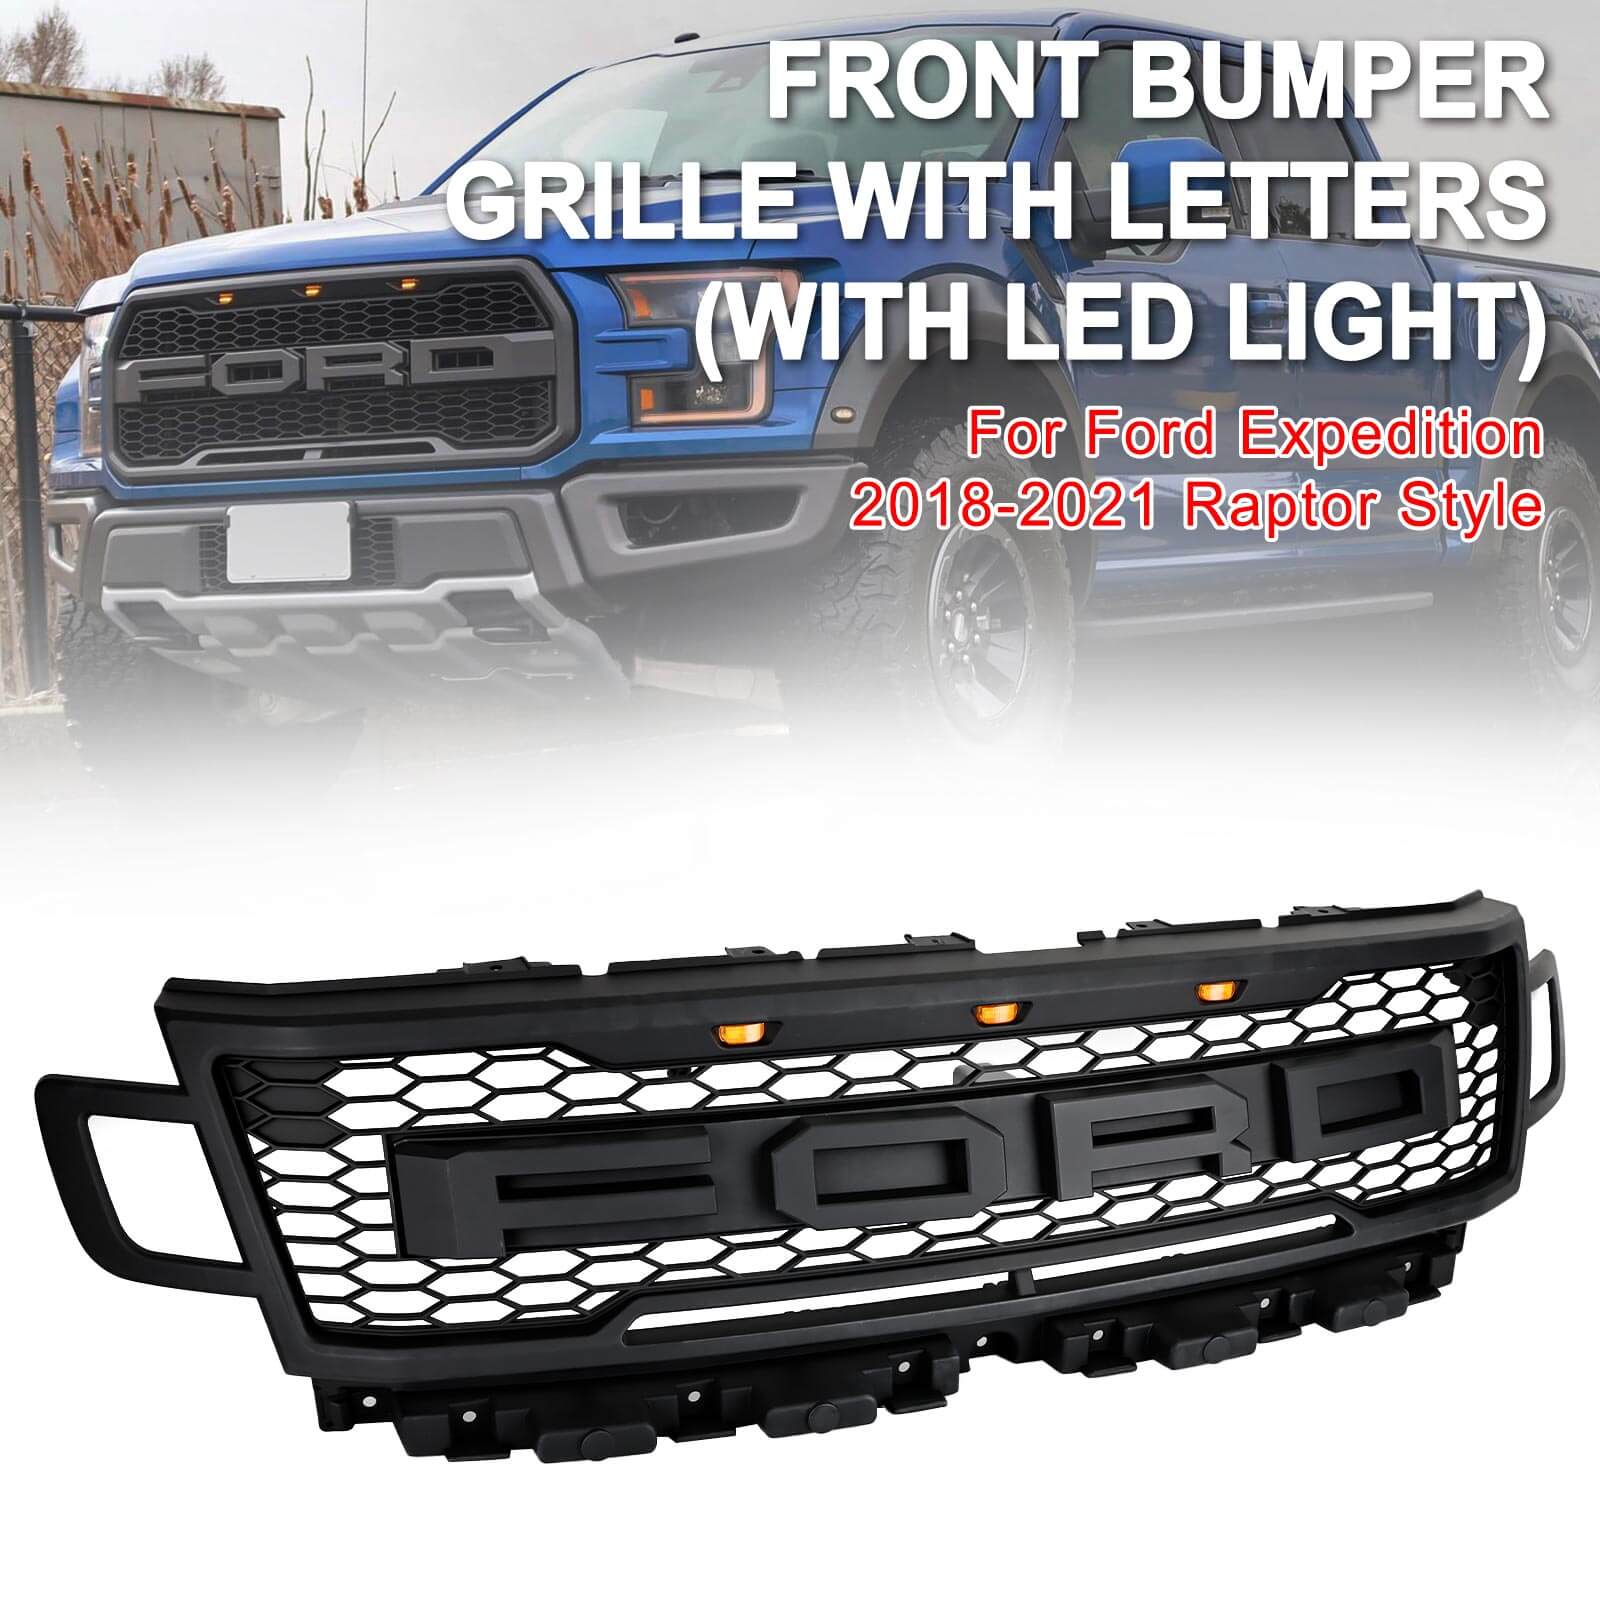 Front Bumper Grill Grille Fit Ford Expedition 2018-2021 Raptor Style W/LED